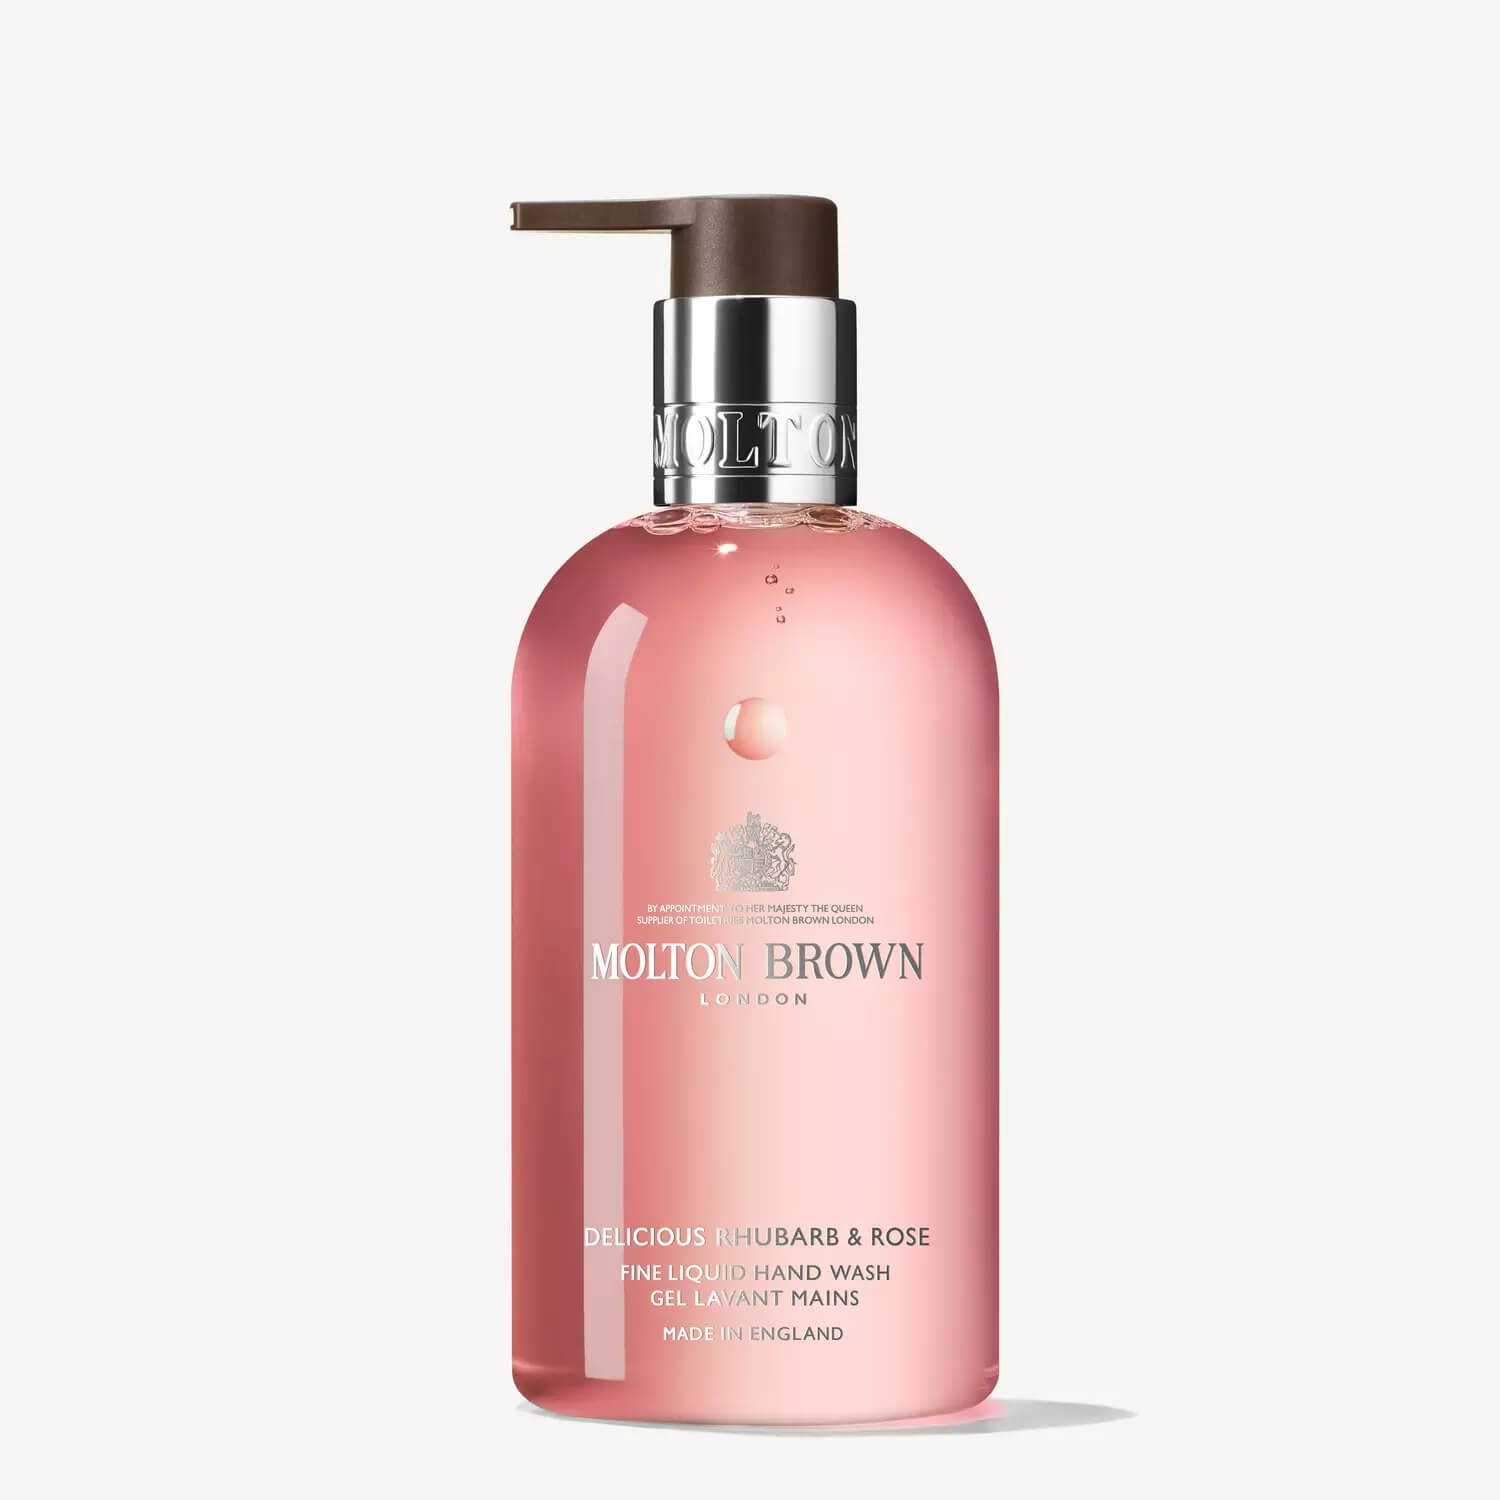 A glimpse of diverse products by Molton Brown, supporting the UK economy on YouK.